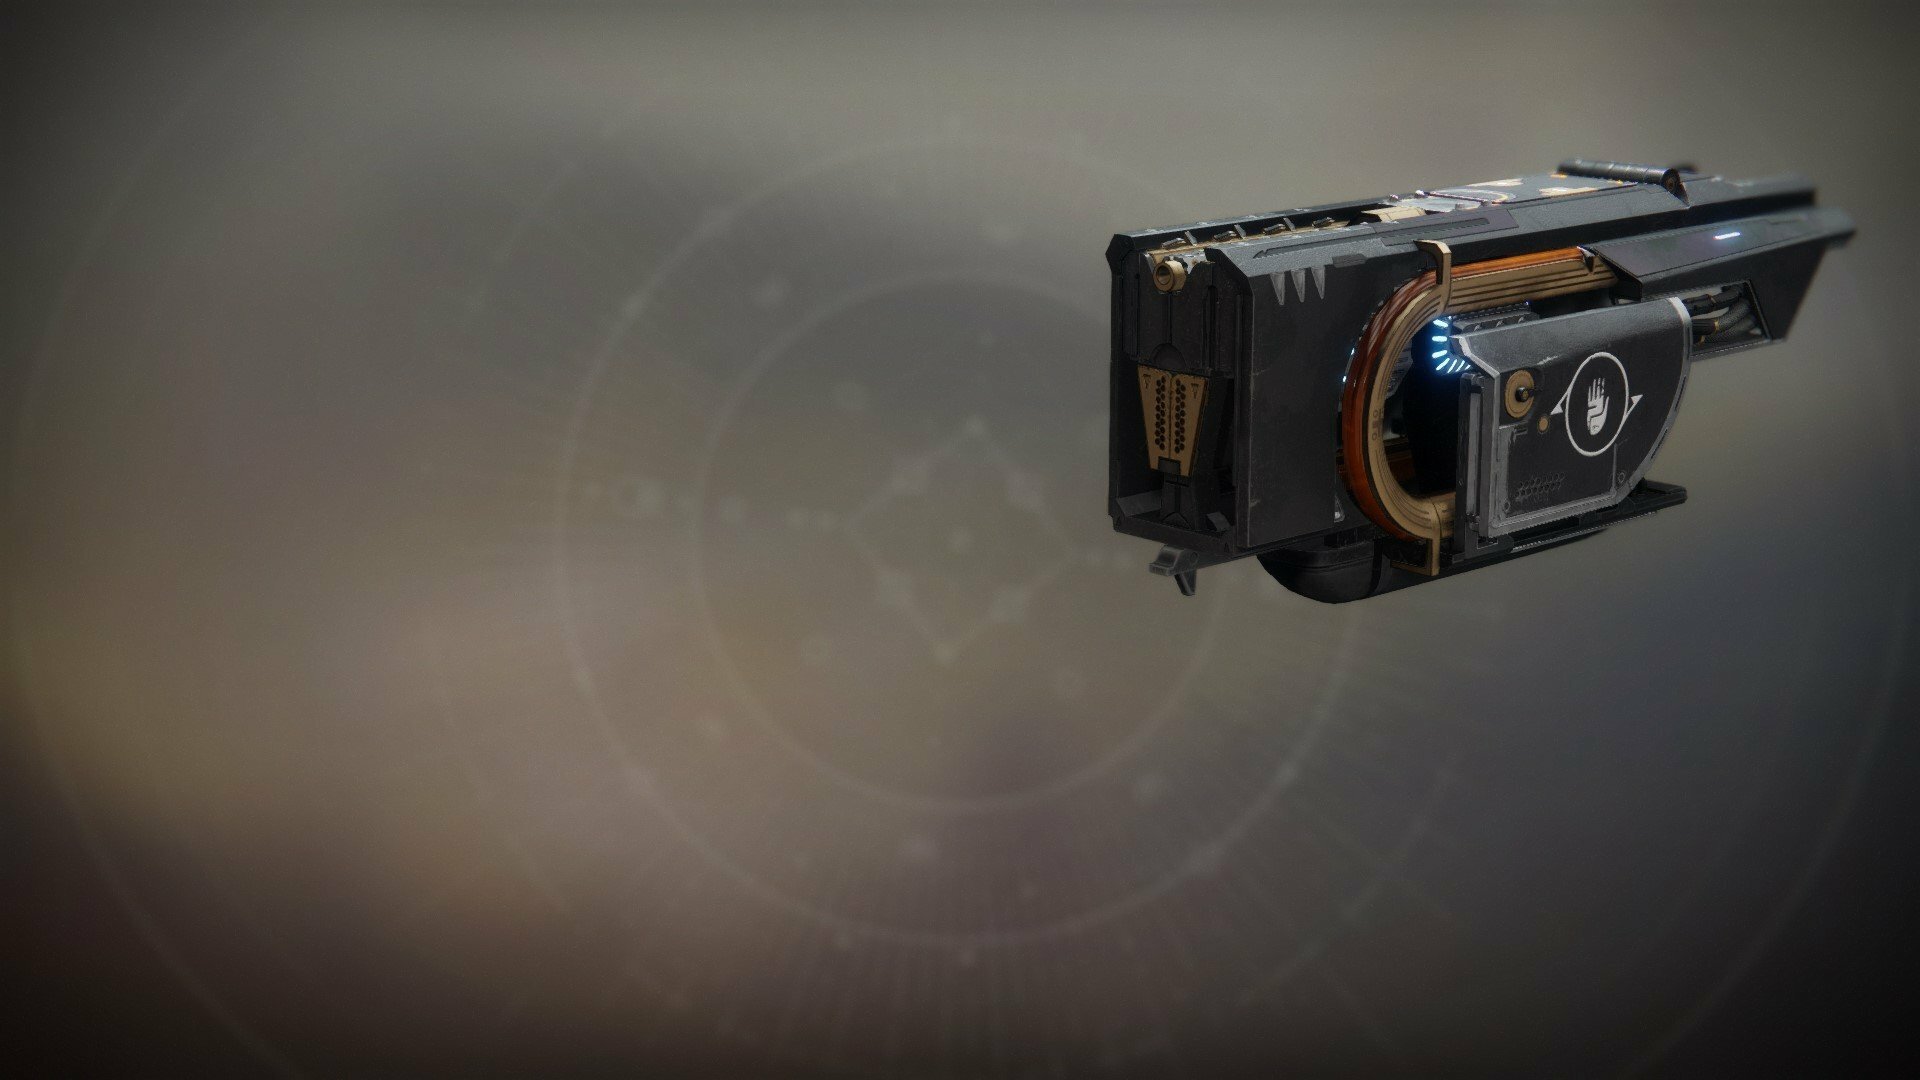 You Can Now Eat Your Destiny 2 Memes With A Jotunn-Themed Toaster.